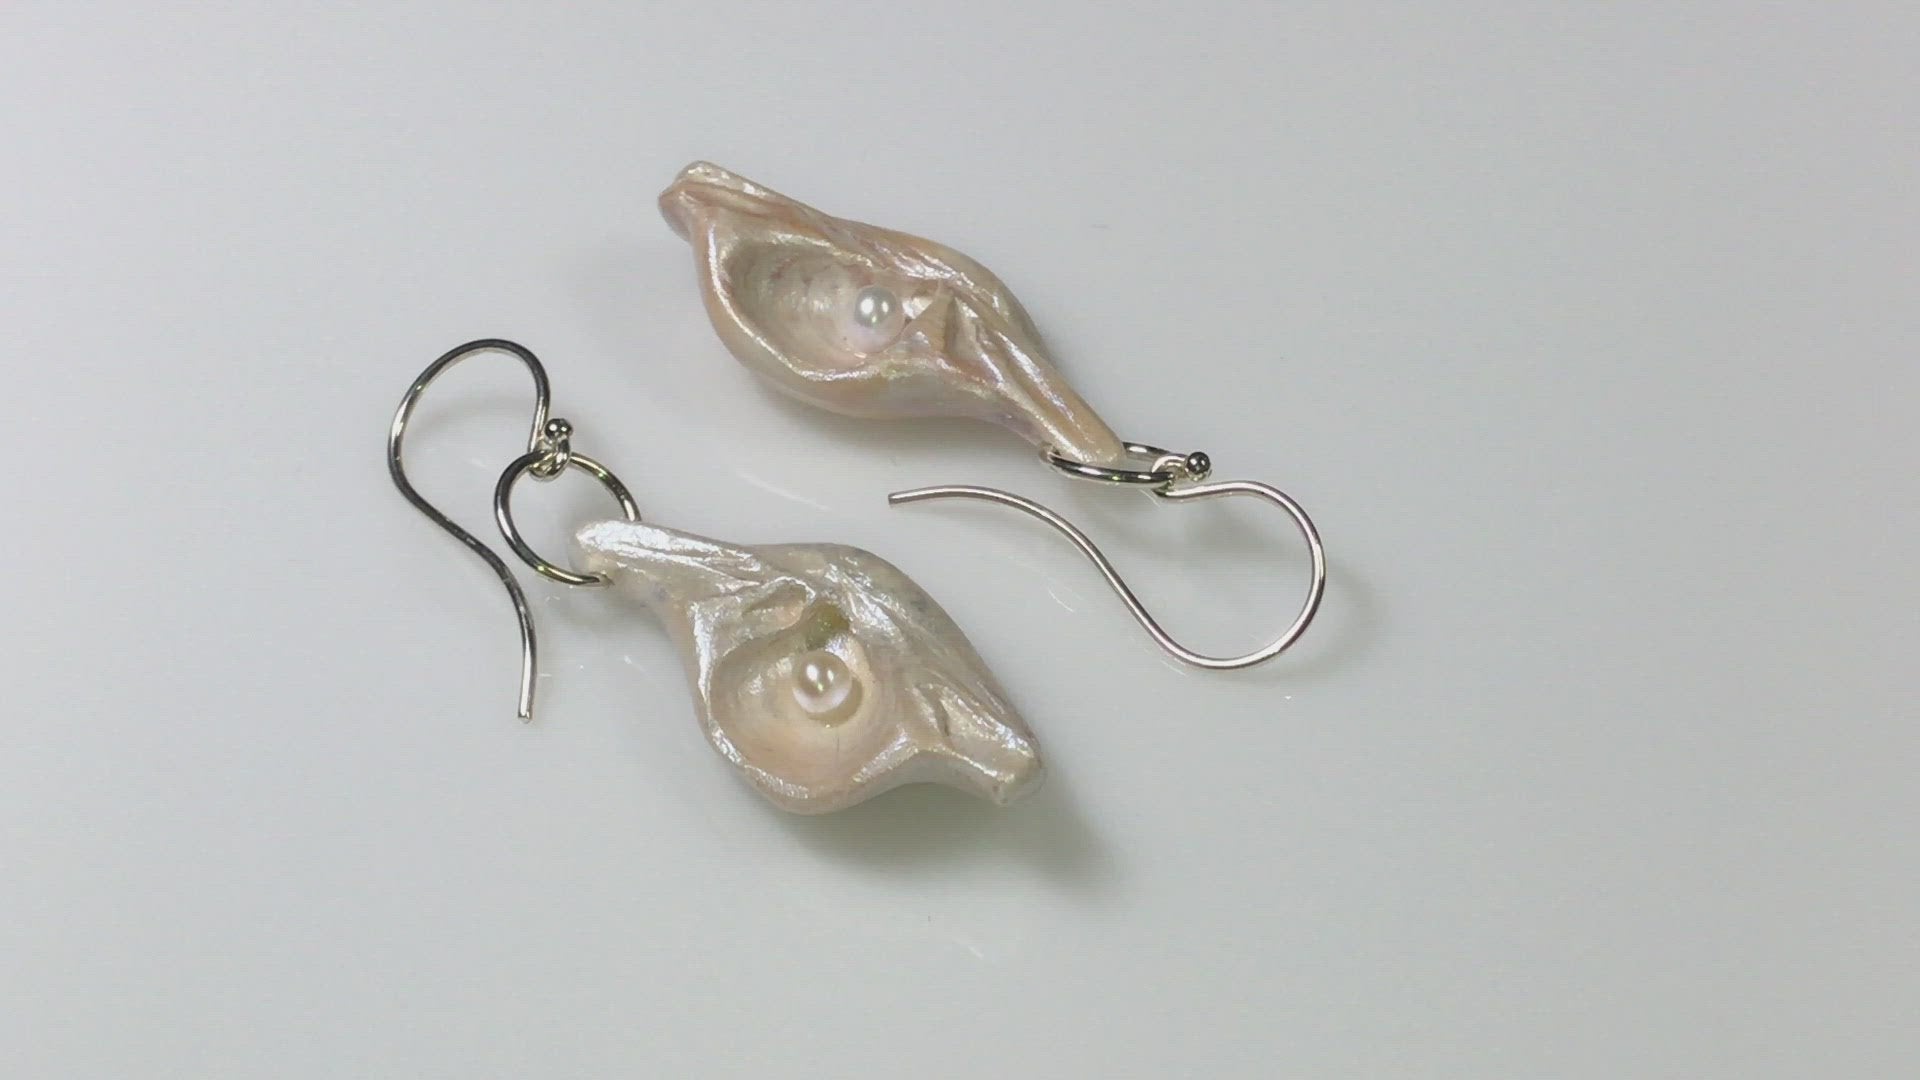 A video showcasing Victoria natural seashell earrings with real baby freshwater pearls. 